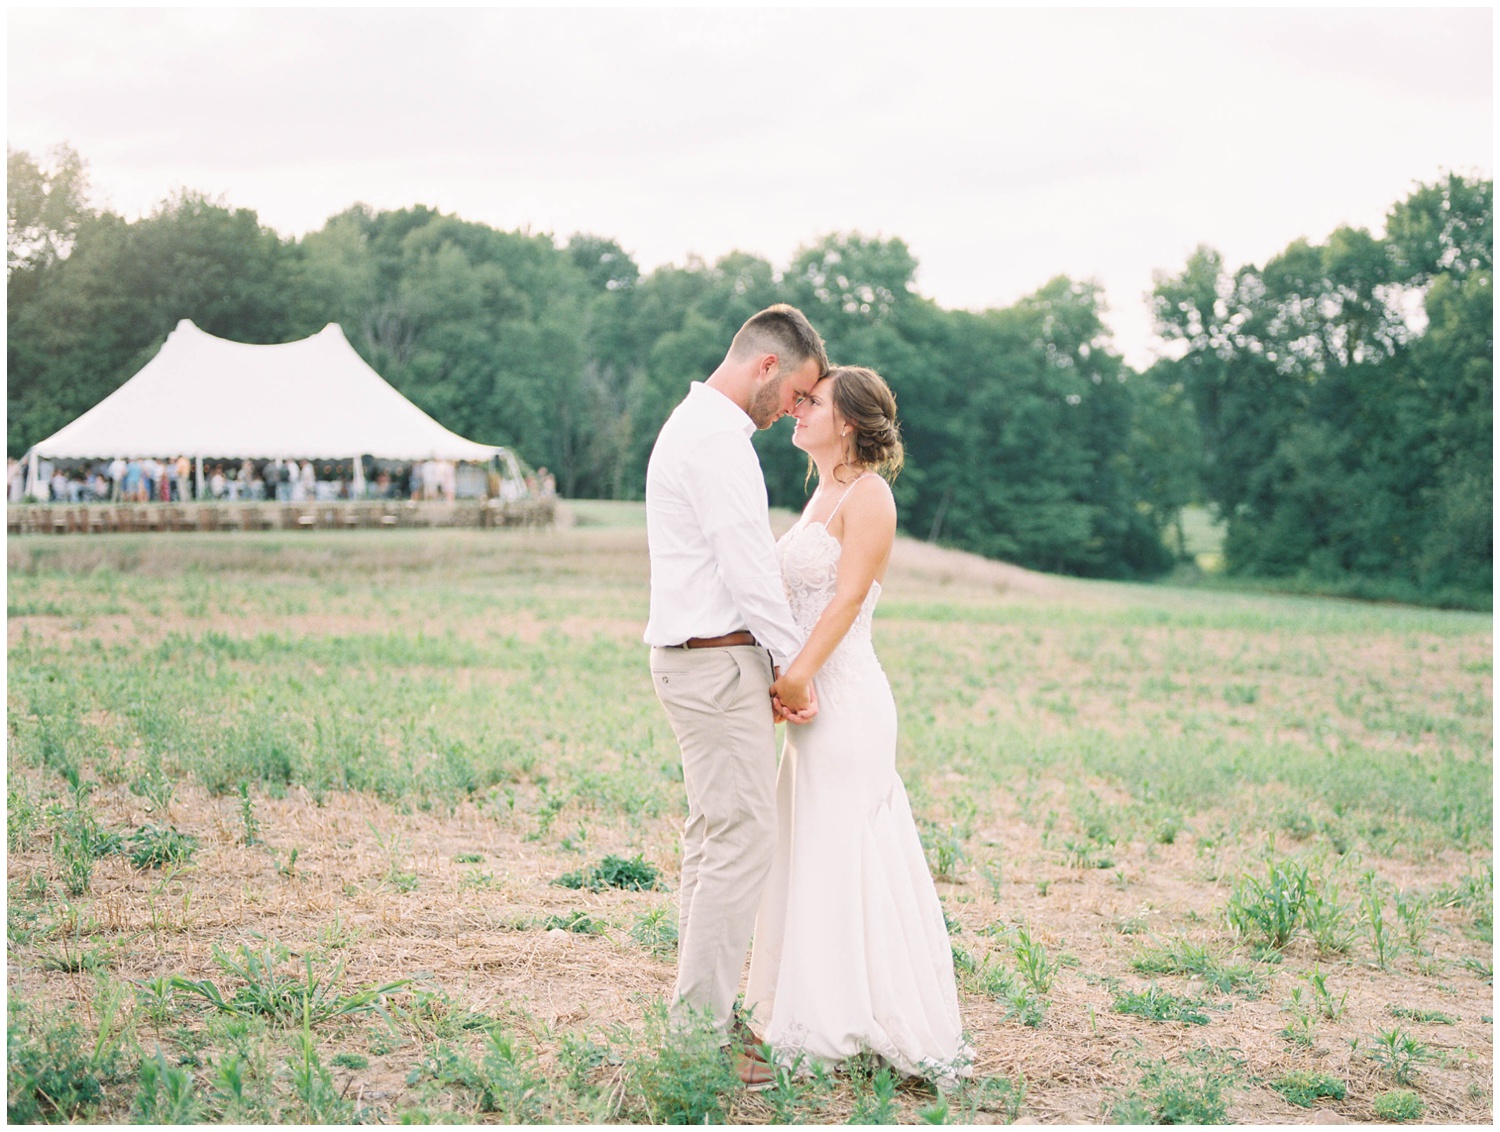 Bride and groom pose in front of their tented backyard wedding in Michigan image by Grand Rapids Wedding Photographer Cynthia Boyle